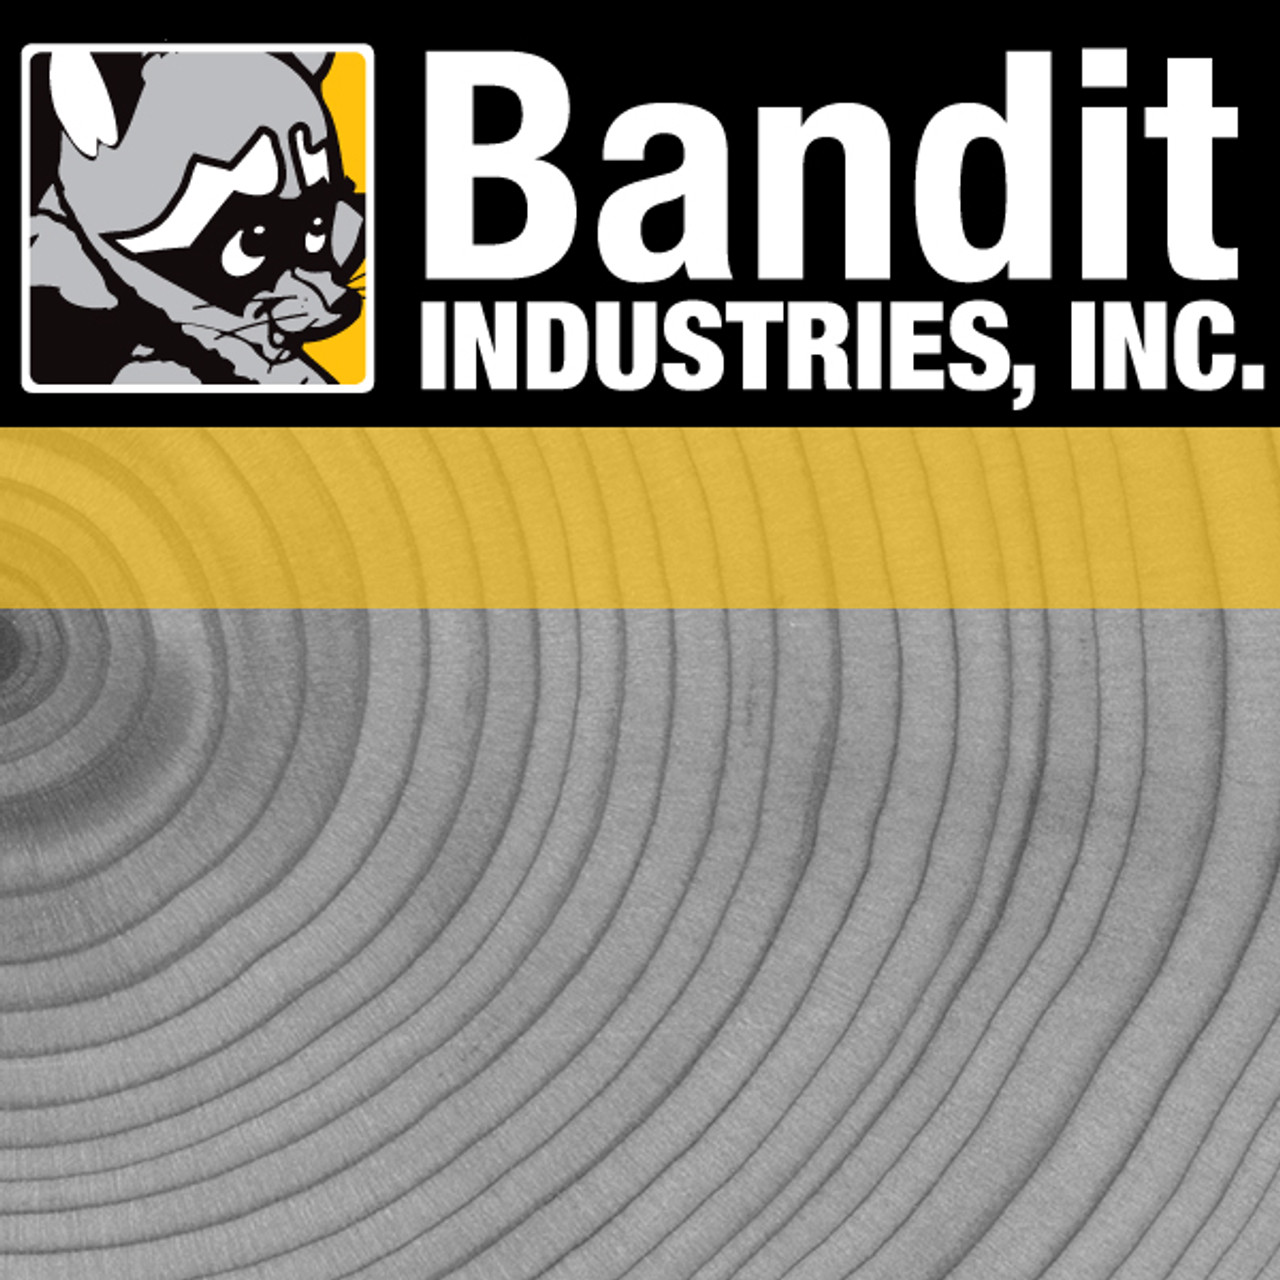 900-9918-85: BANDIT 900 SERIES WEARSHARP TOOTH FOR WHEELS 23"" & LARGER WHE